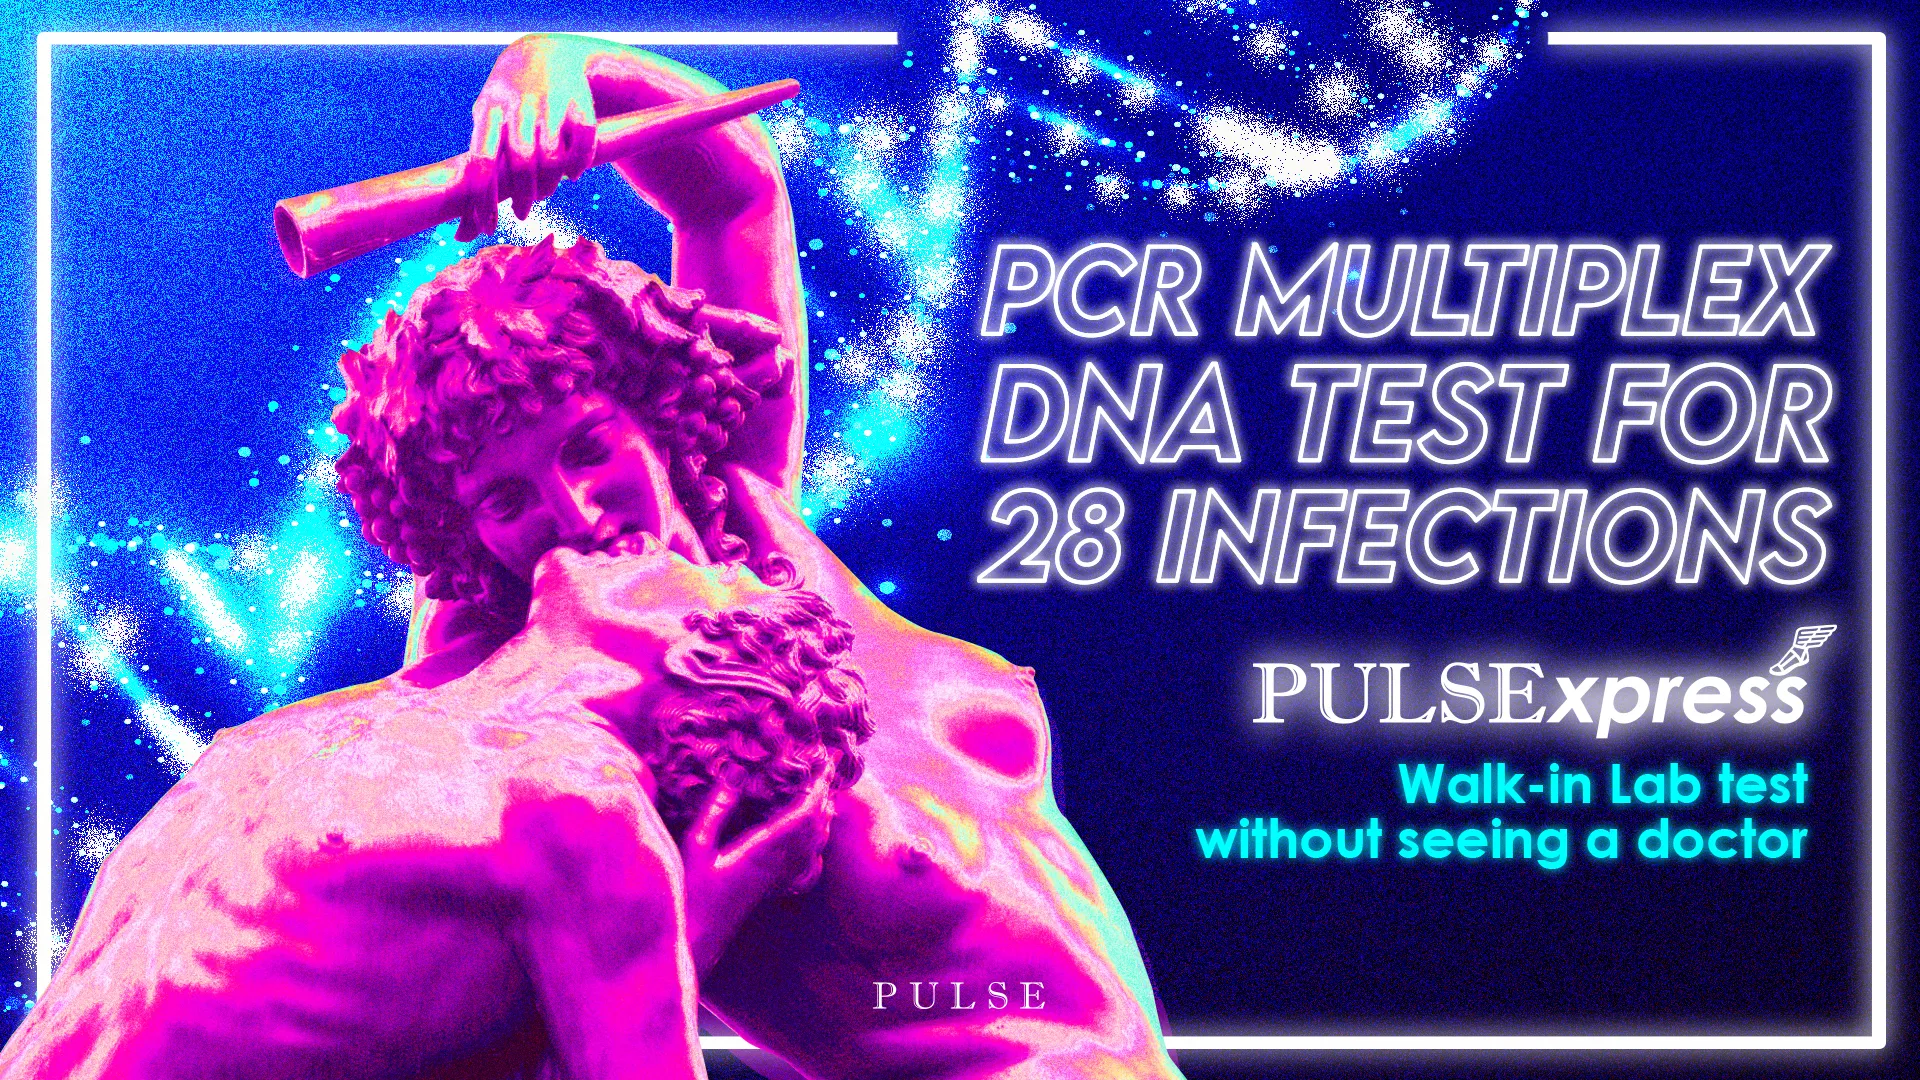 PCR Multiplex DNA Test for 28 Infections - Most advanced DNA test in Bangkok, Pattaya, Phuket, Chiang Mai - Thailand